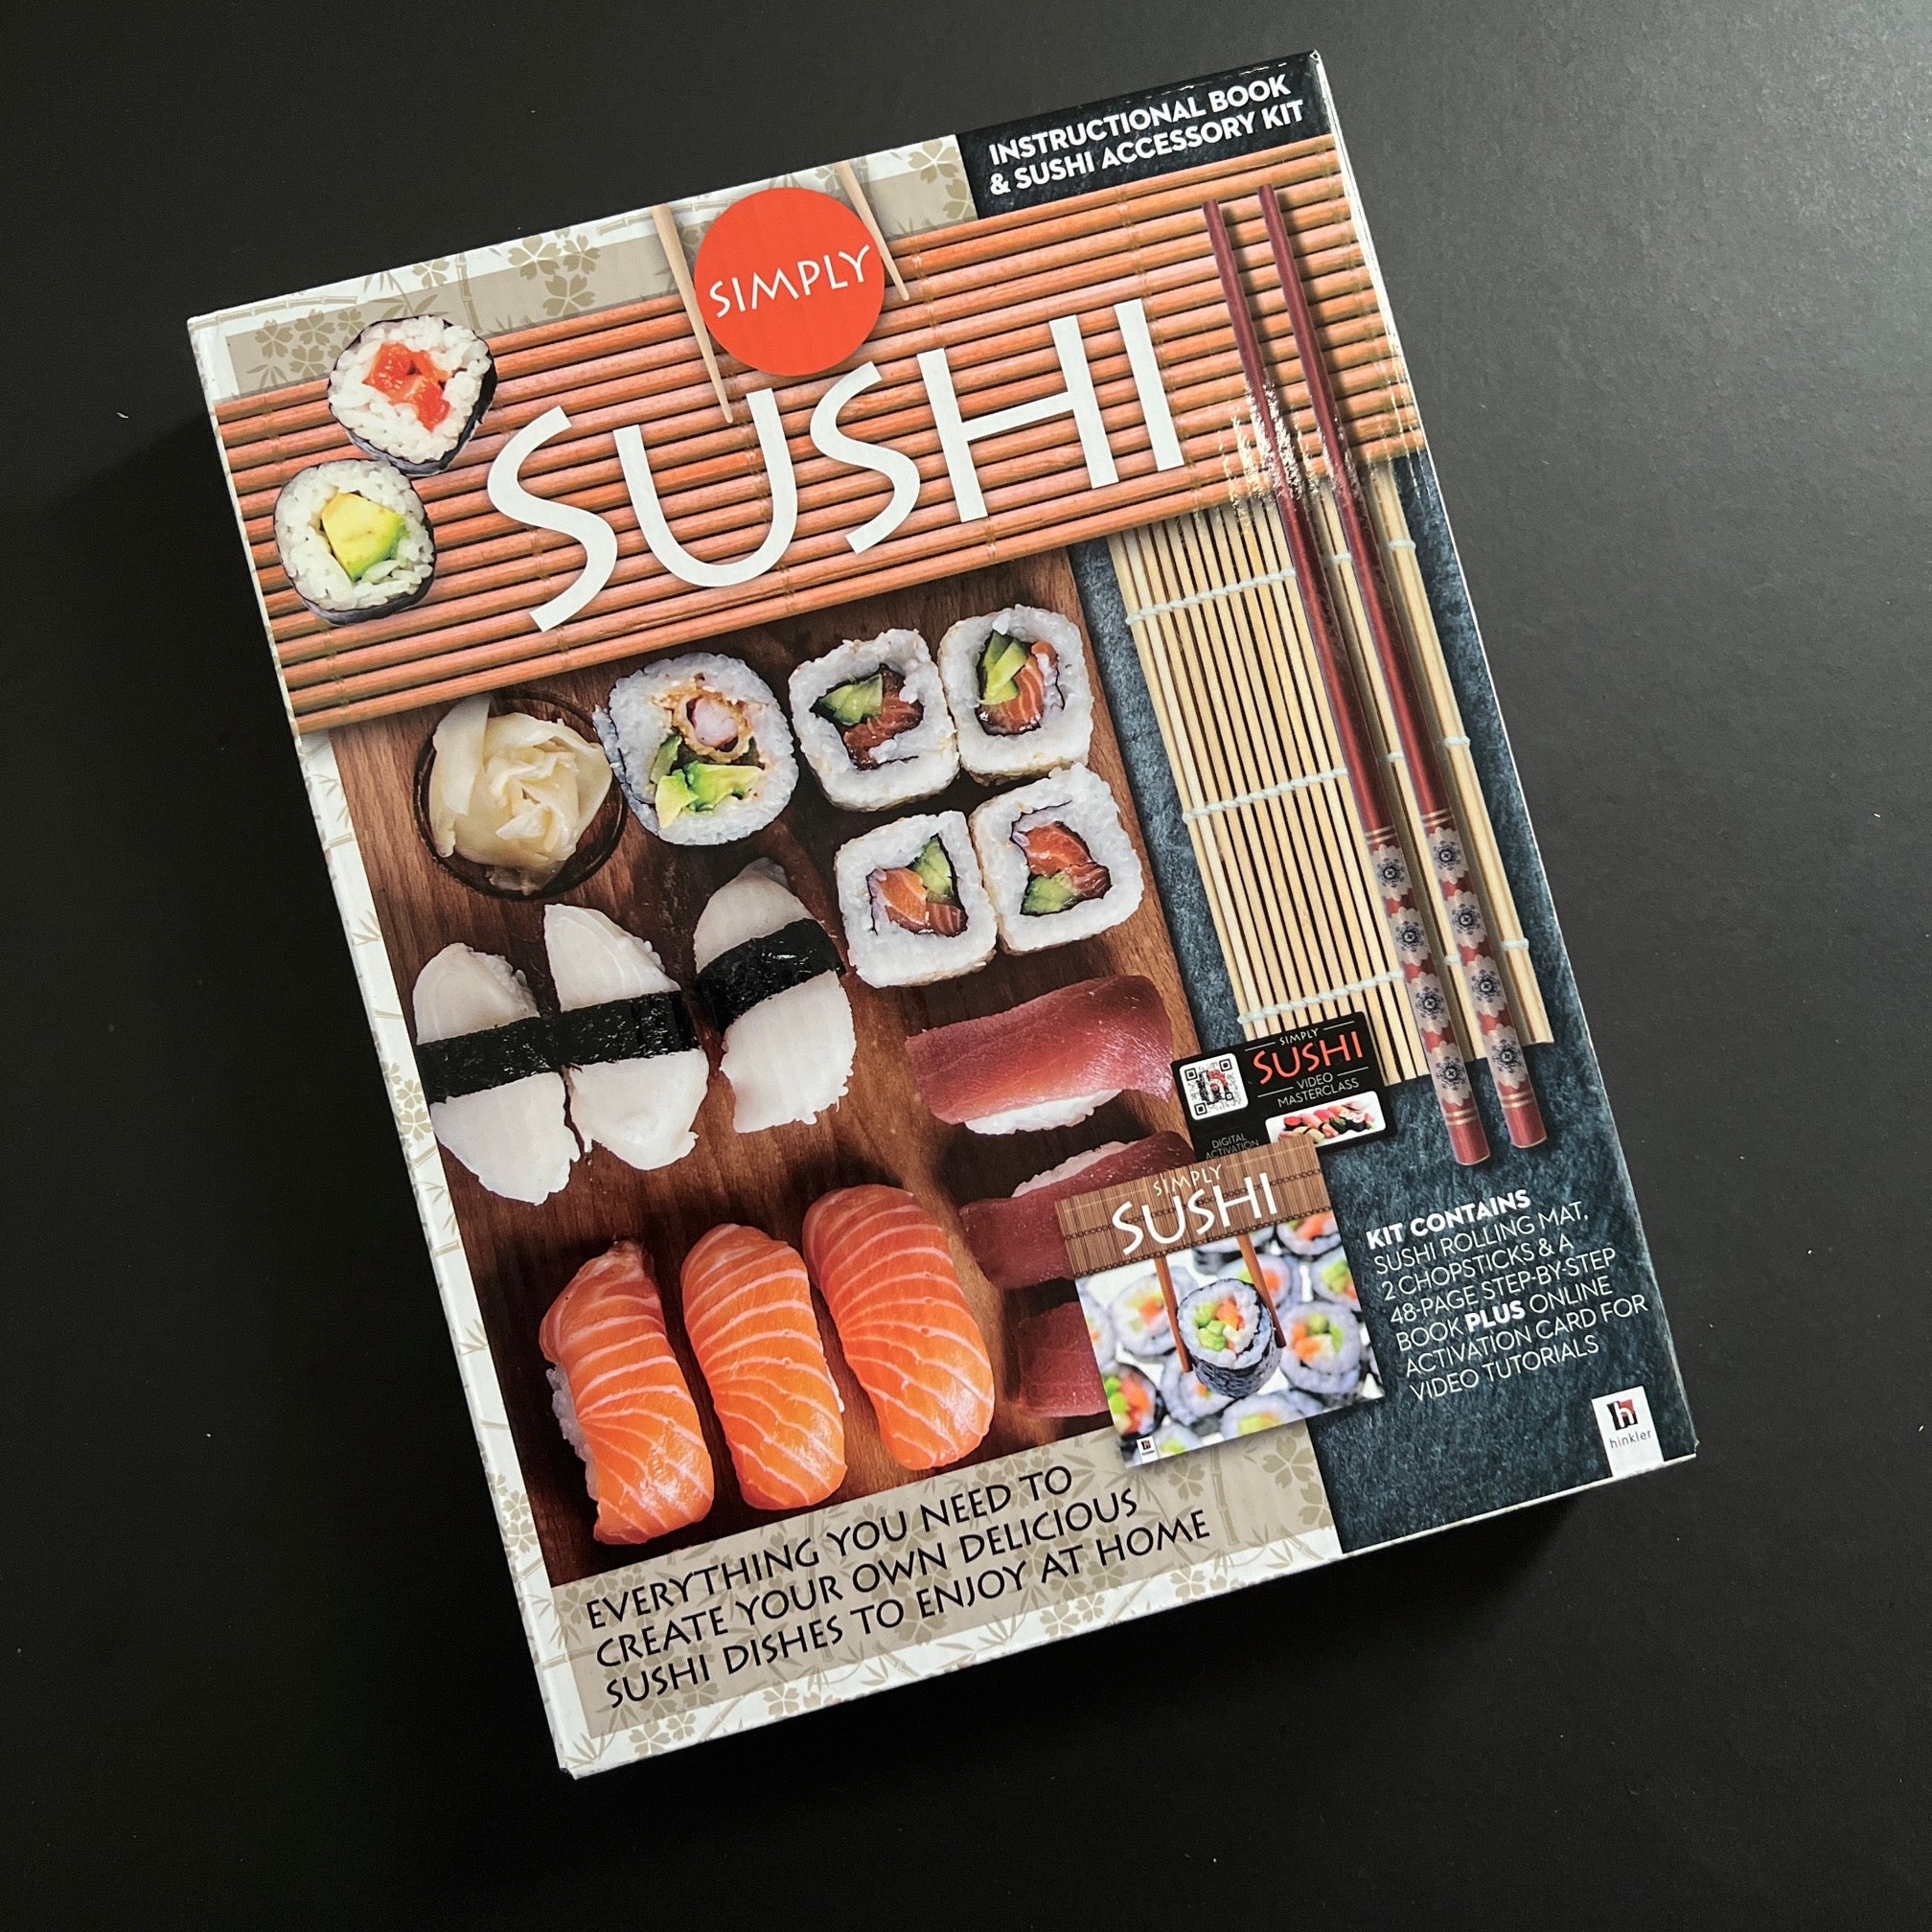 Sushi at home has never been simpler! Come unbox our DIY sushi kit wit